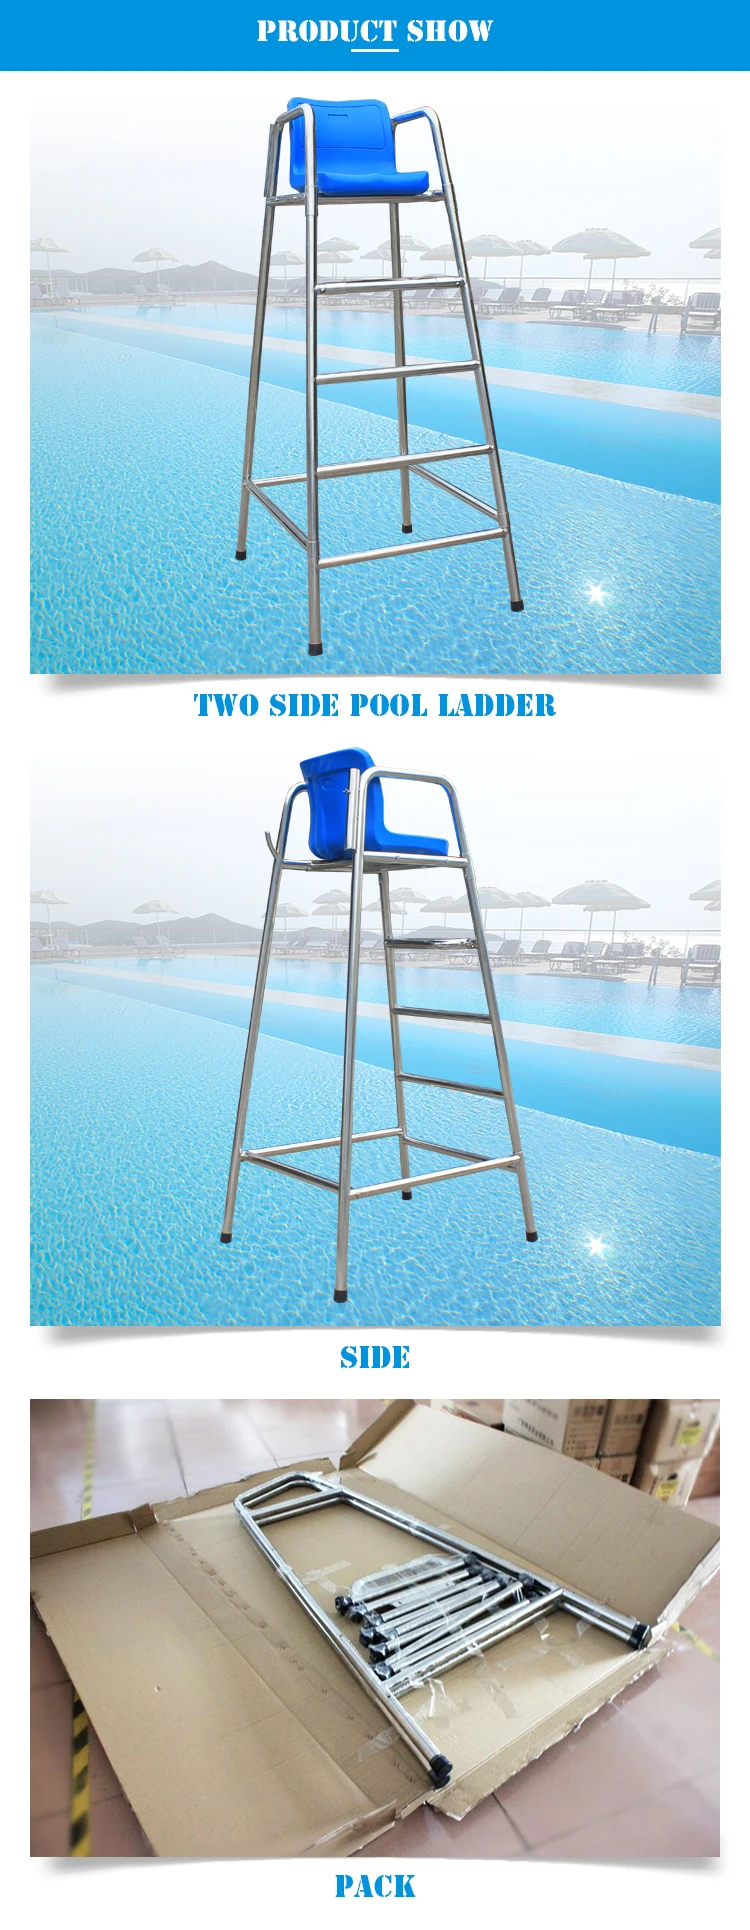 Luxury Lifeguard Chair For Swimming Pool View Luxury Lifeguard